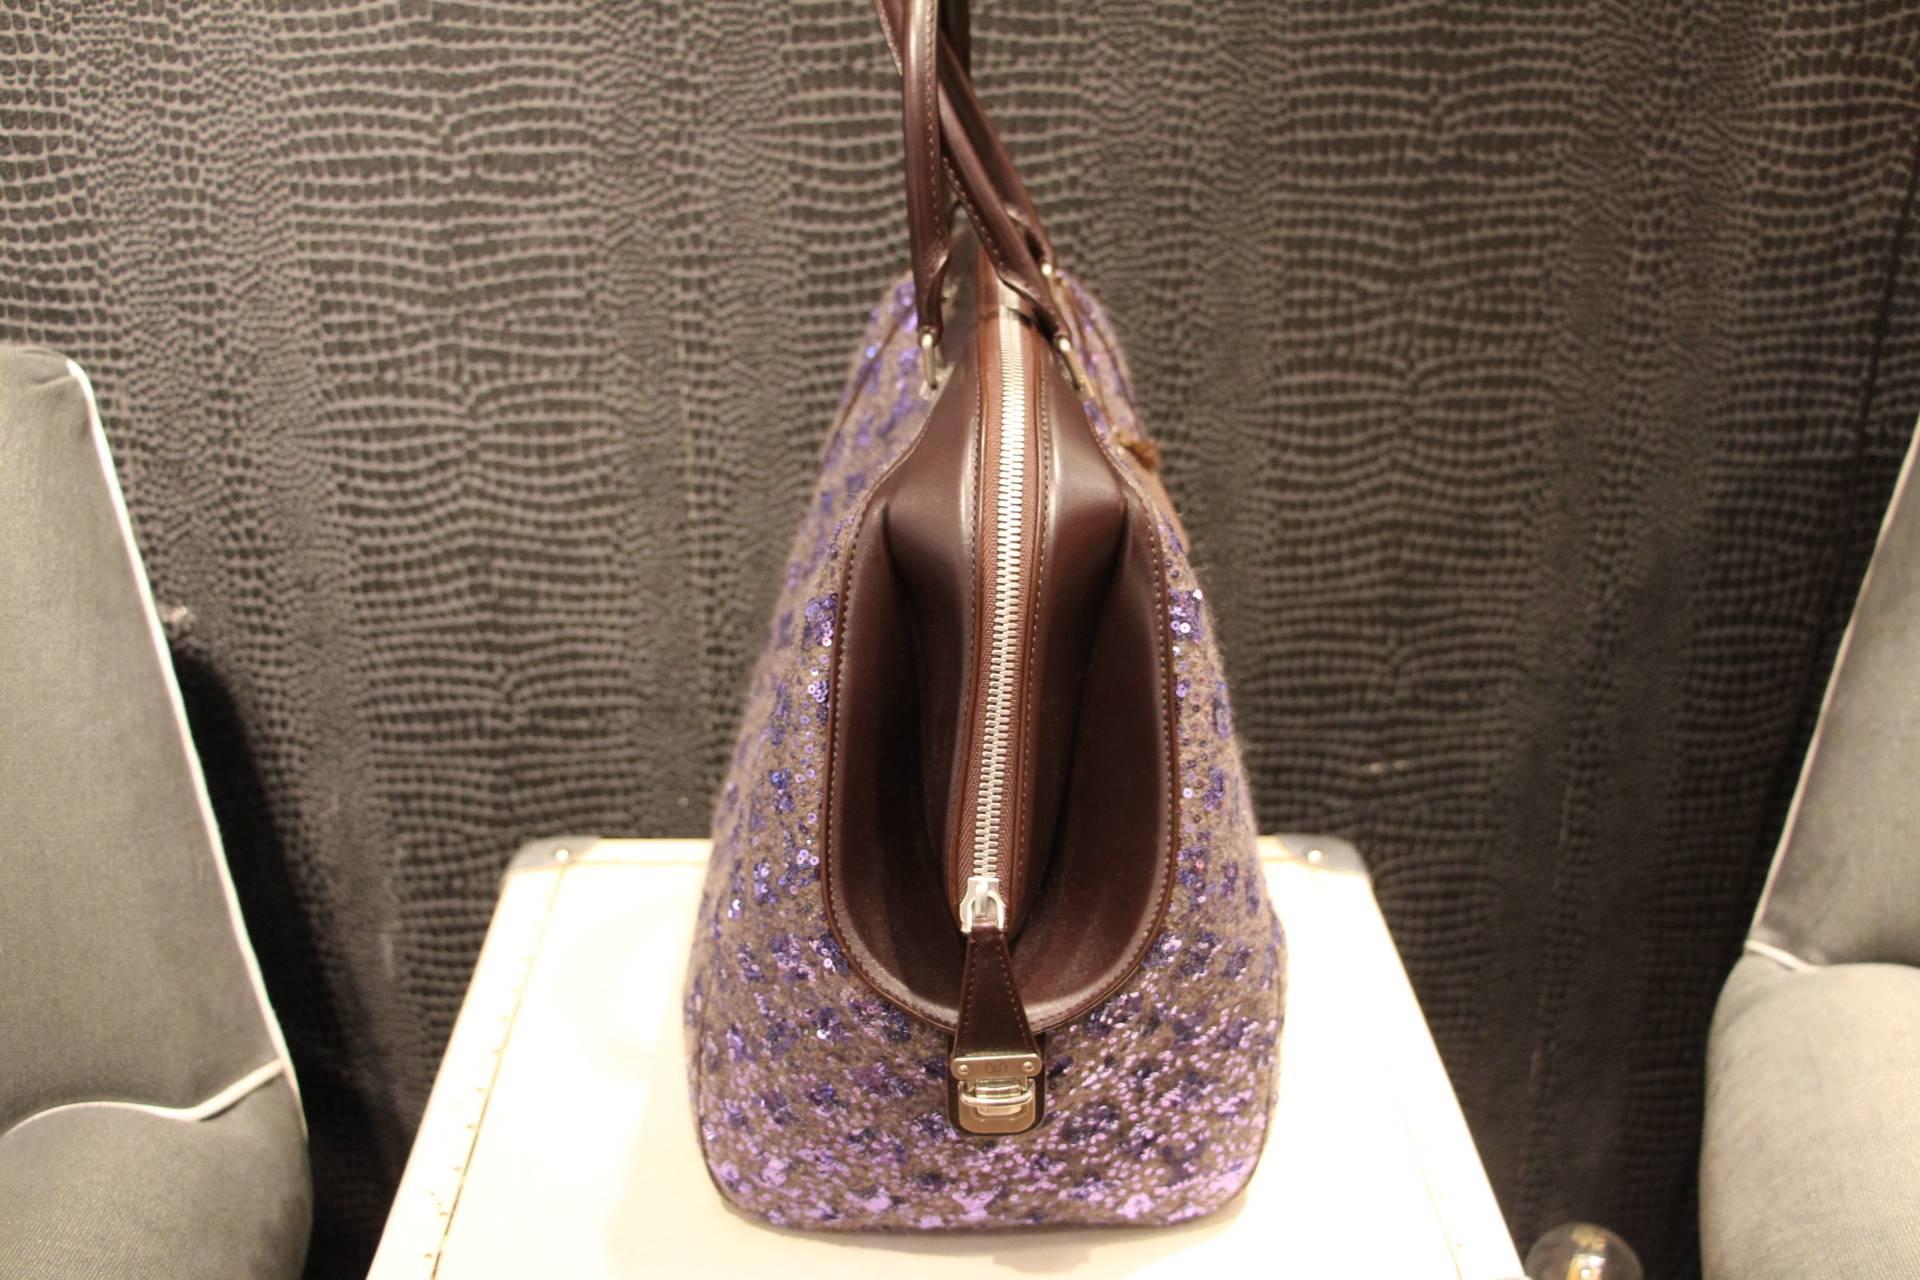 This beautiful bag is from the 2012-2013 fall/winter runway collection. It has got unusual shape and features luxurious leather, a multitude of luminous purple sequins painstakingly embroidered on for a truly dazzling effect and a luminous LV